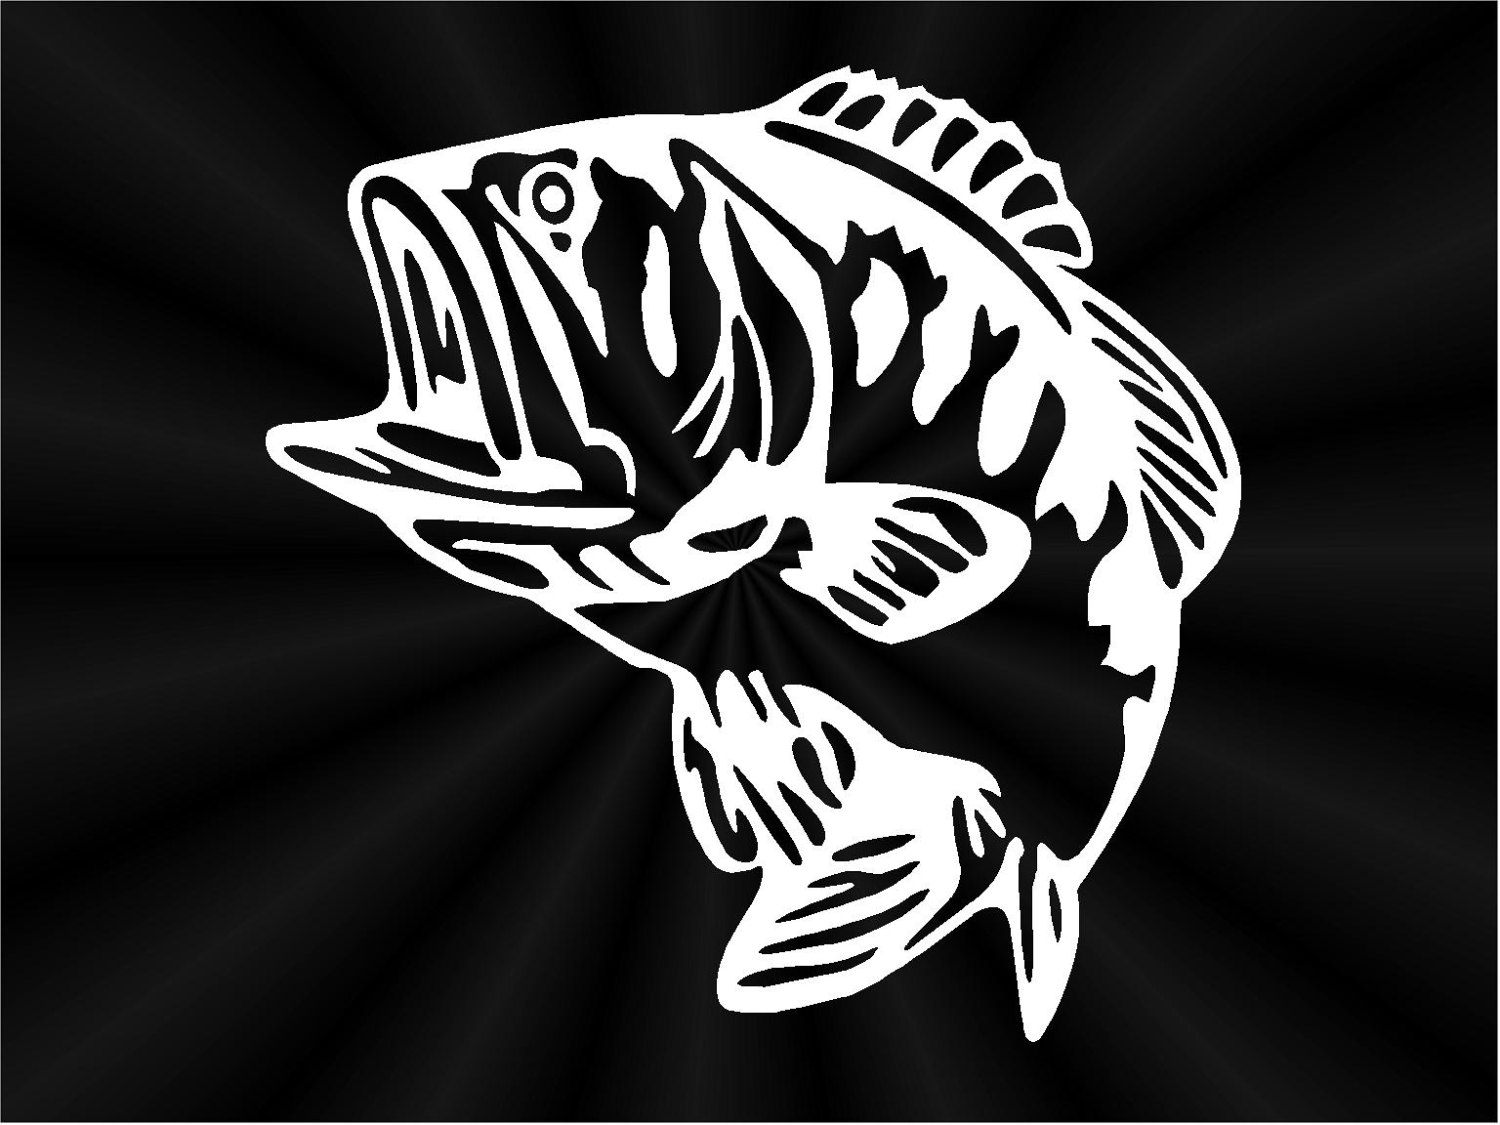 Bass Decal Largemouth Bass decal Fish Decal Boat by TruLineDecals